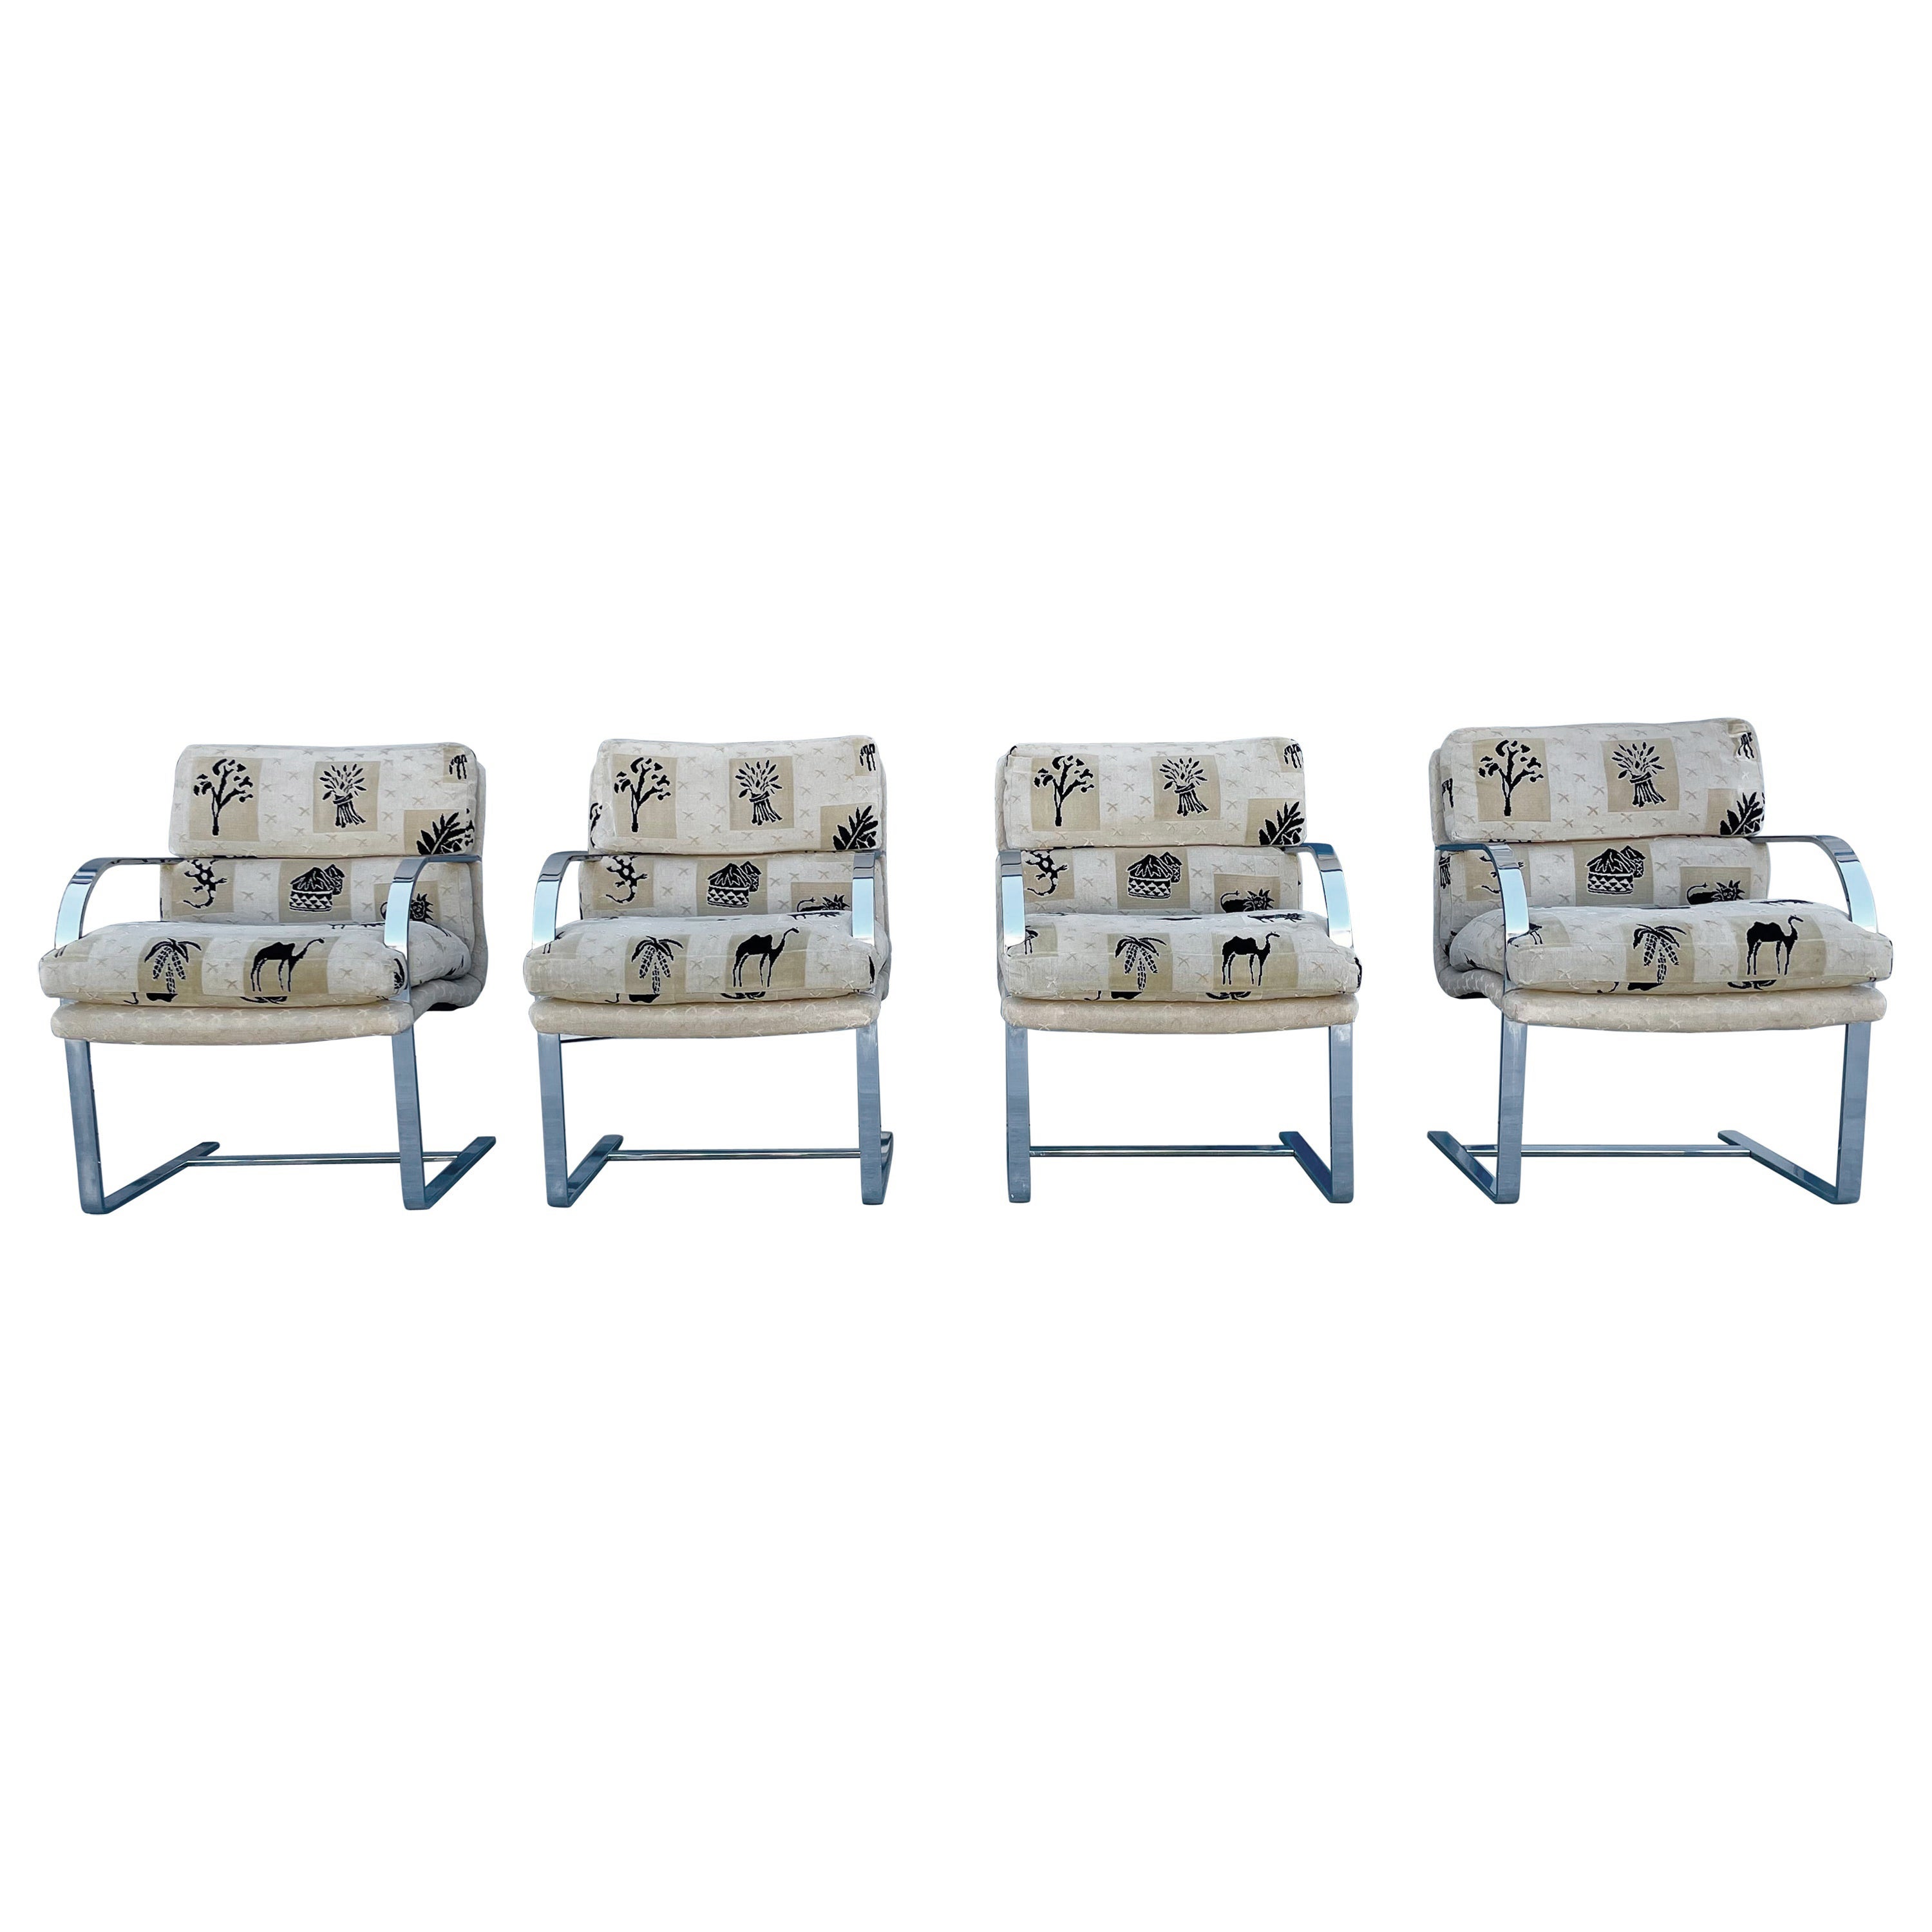 Vintage Chrome Dining Chairs by Ludwig Mies Van Der Rohe